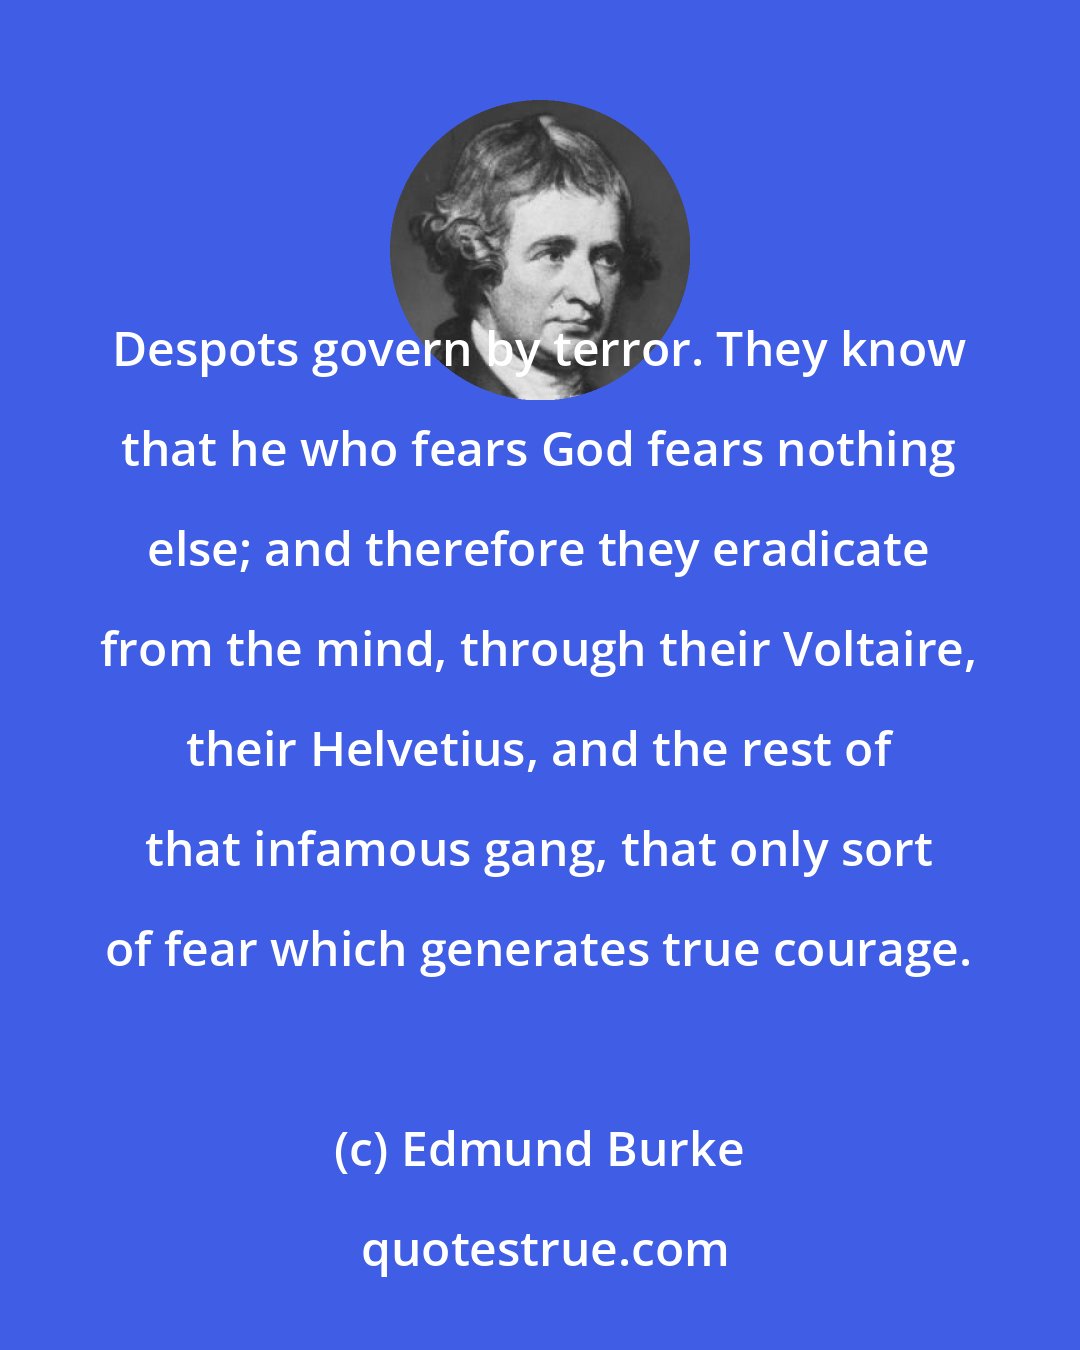 Edmund Burke: Despots govern by terror. They know that he who fears God fears nothing else; and therefore they eradicate from the mind, through their Voltaire, their Helvetius, and the rest of that infamous gang, that only sort of fear which generates true courage.